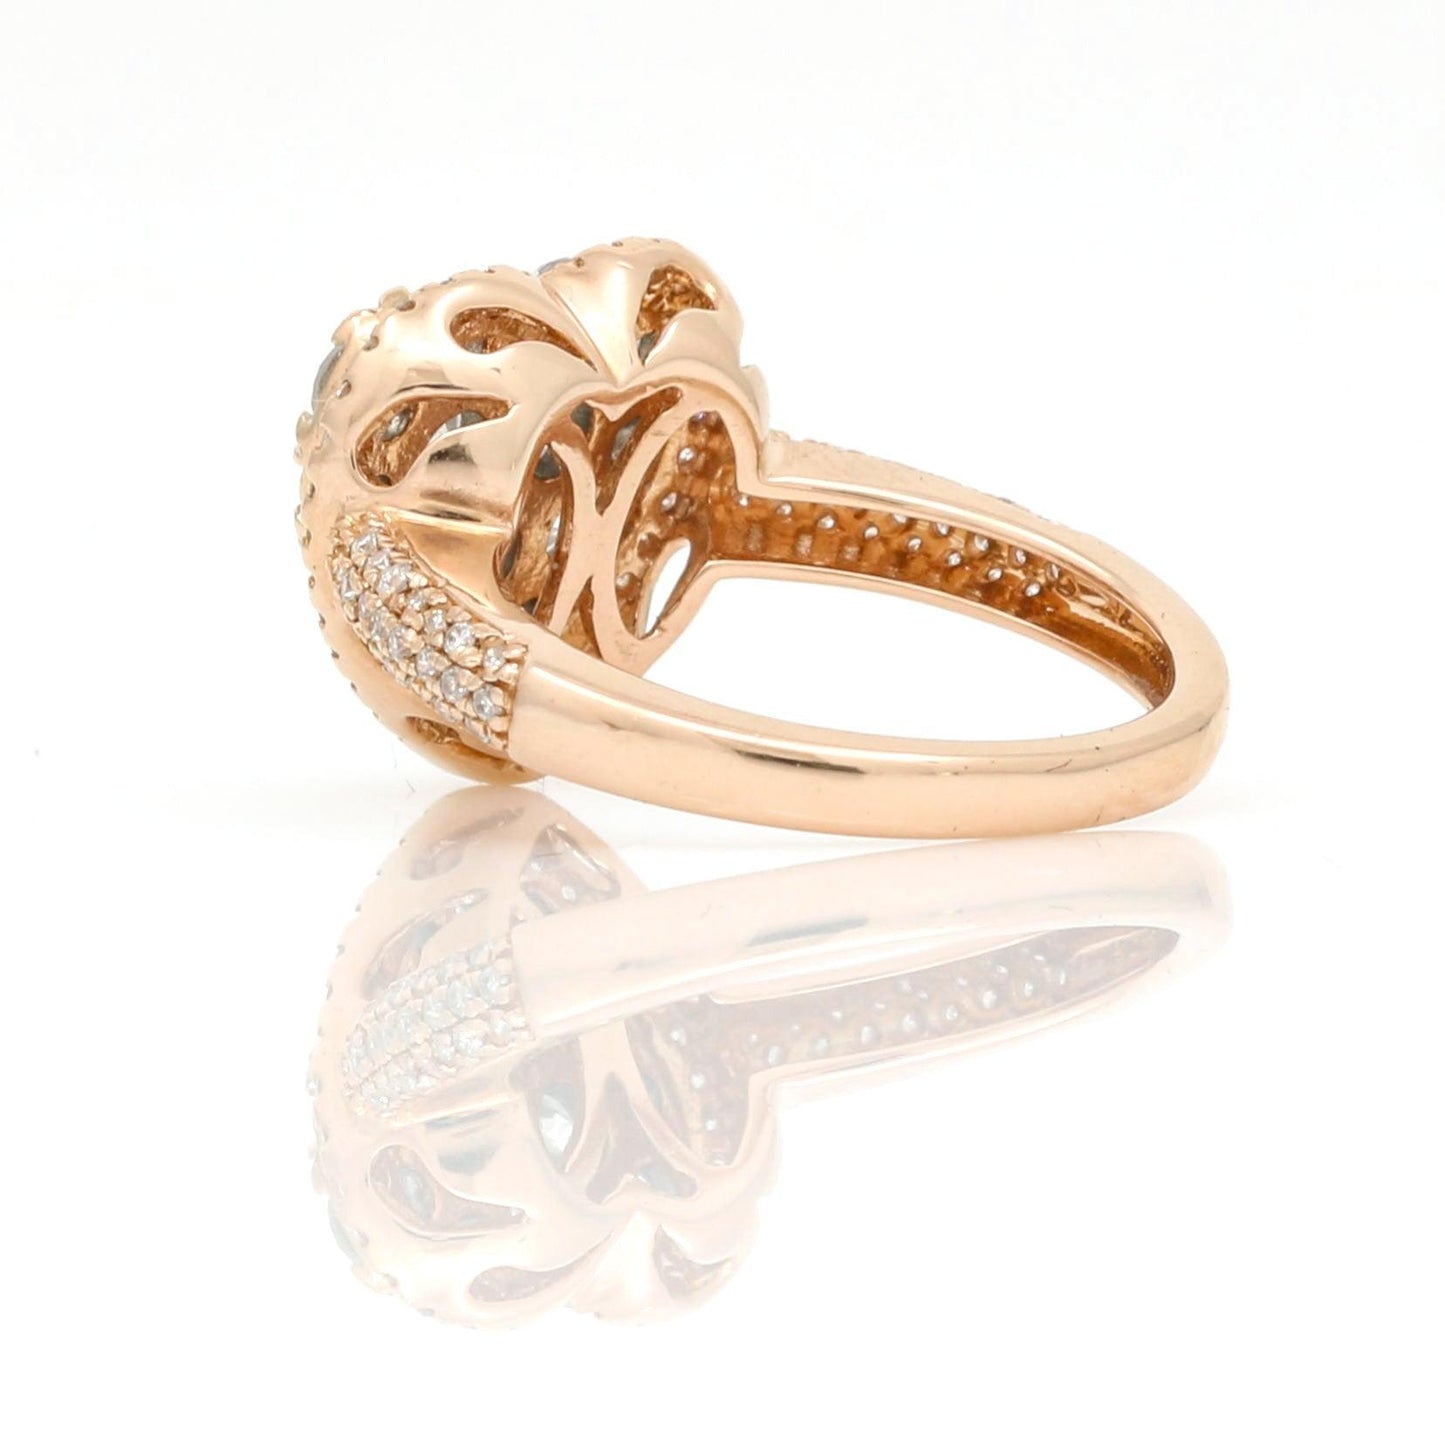 Pave Diamond Heart Shaped Ring in 14k Rose Gold - 31 Jewels Inc.